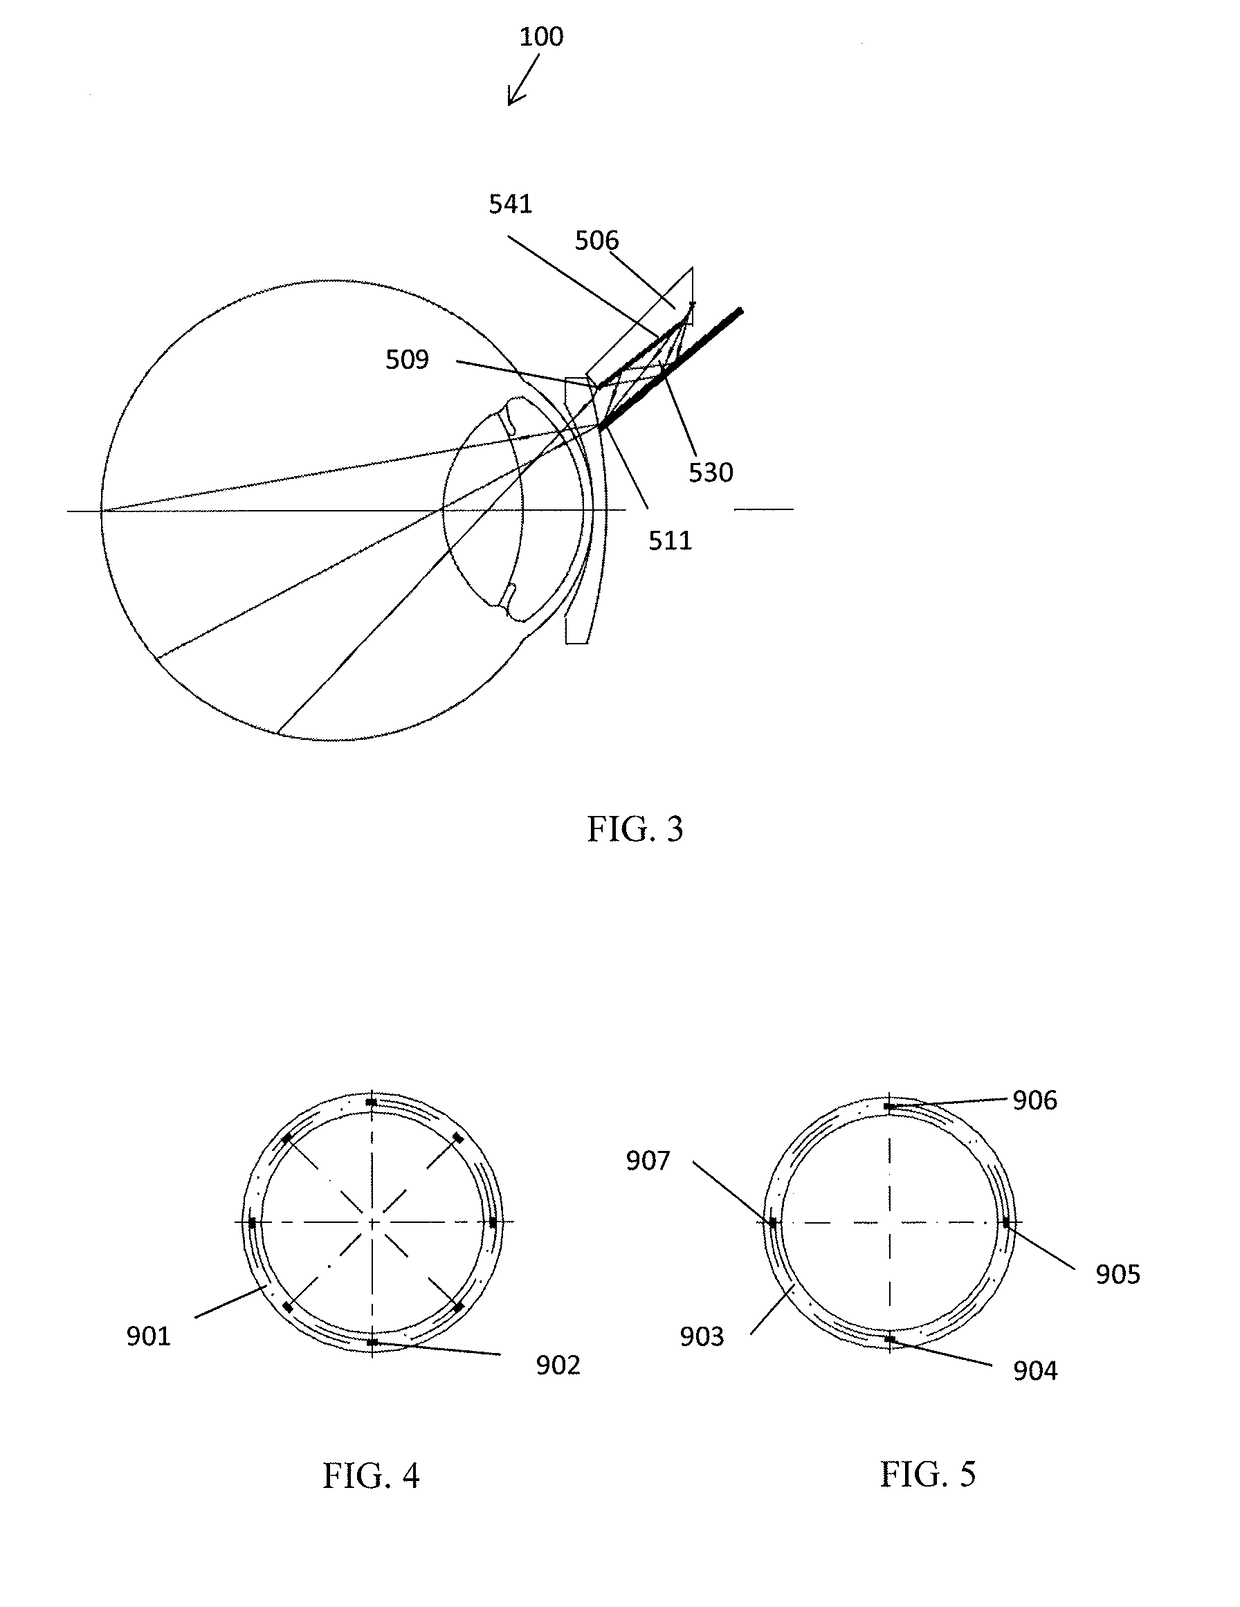 An eye imaging apparatus with sequential illumination and a syntactic image analyzing method